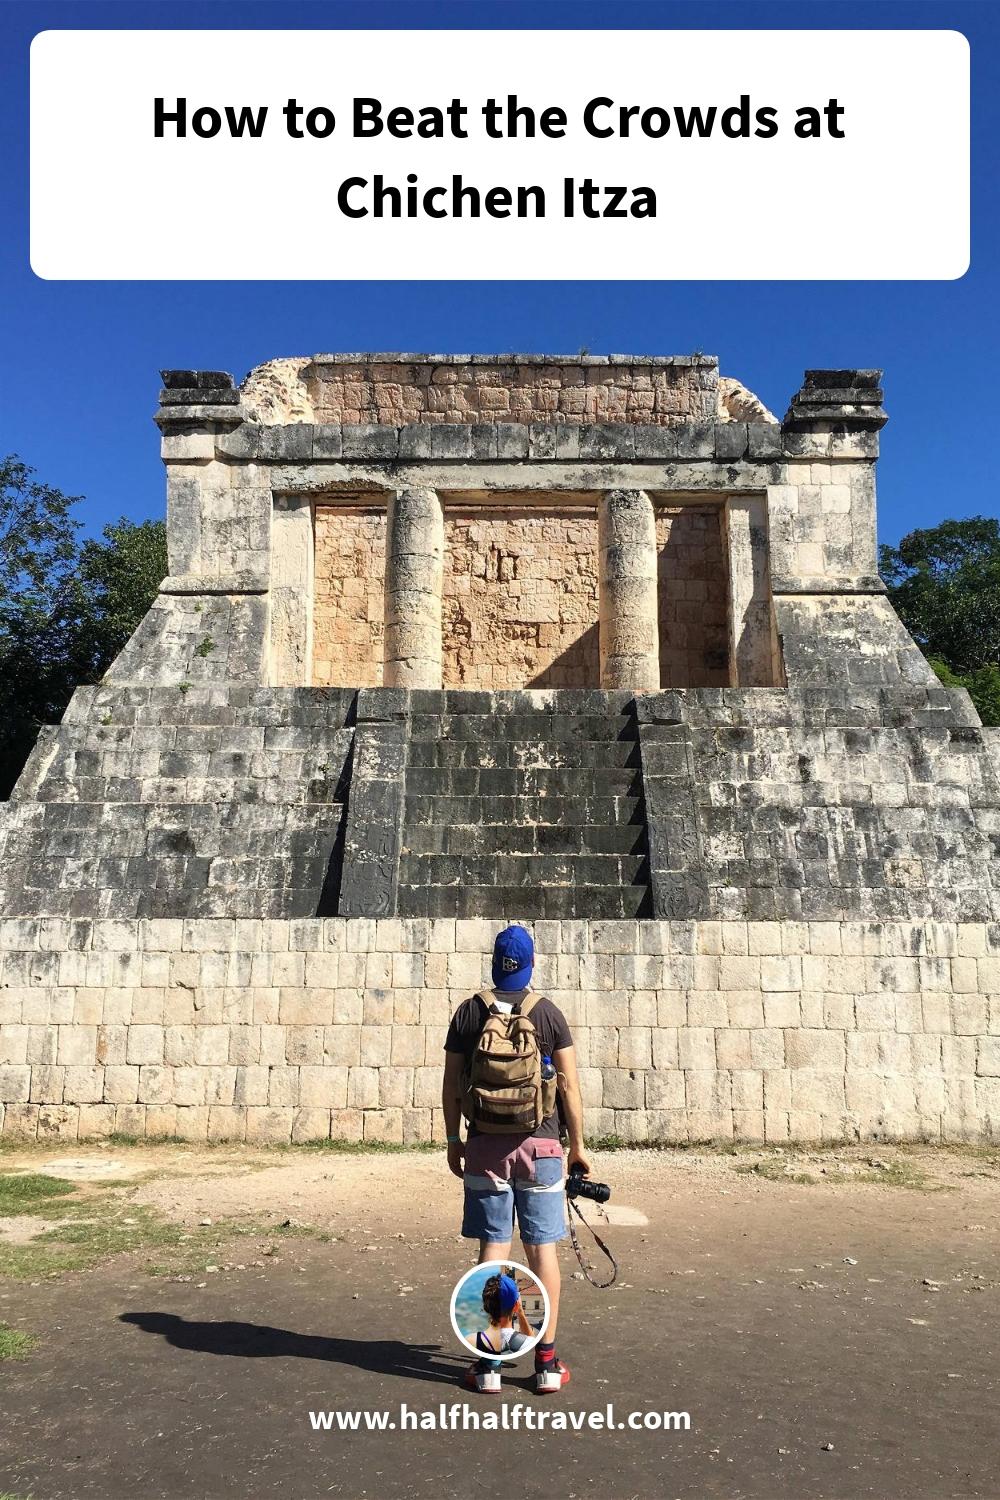 Pinterest image from the 'How to Beat the Crowds at Chichen Itza' article on Half Half Travel